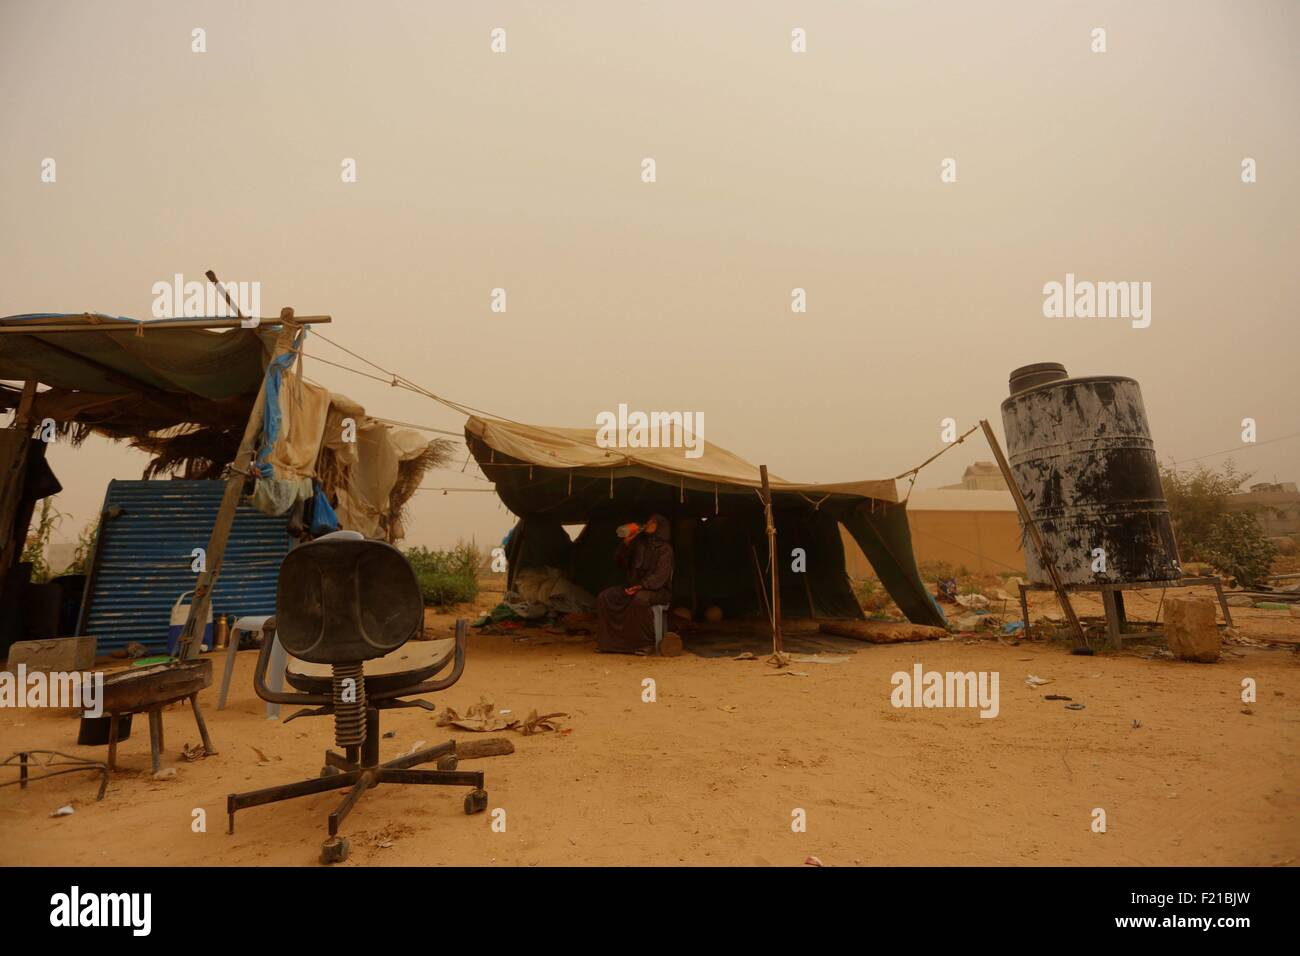 Gaza, Gaza Strip. 9th Sep, 2015. A Palestinian woman is seen inside a tent during a dust storm after her house was destroyed during the 50-day Israeli war in the summer of 2014 in the village of Khuzaa, east of Khan Yunis, in the southern Gaza Strip, on Sept 9, 2015. © Yasser Qudih/Xinhua/Alamy Live News Stock Photo